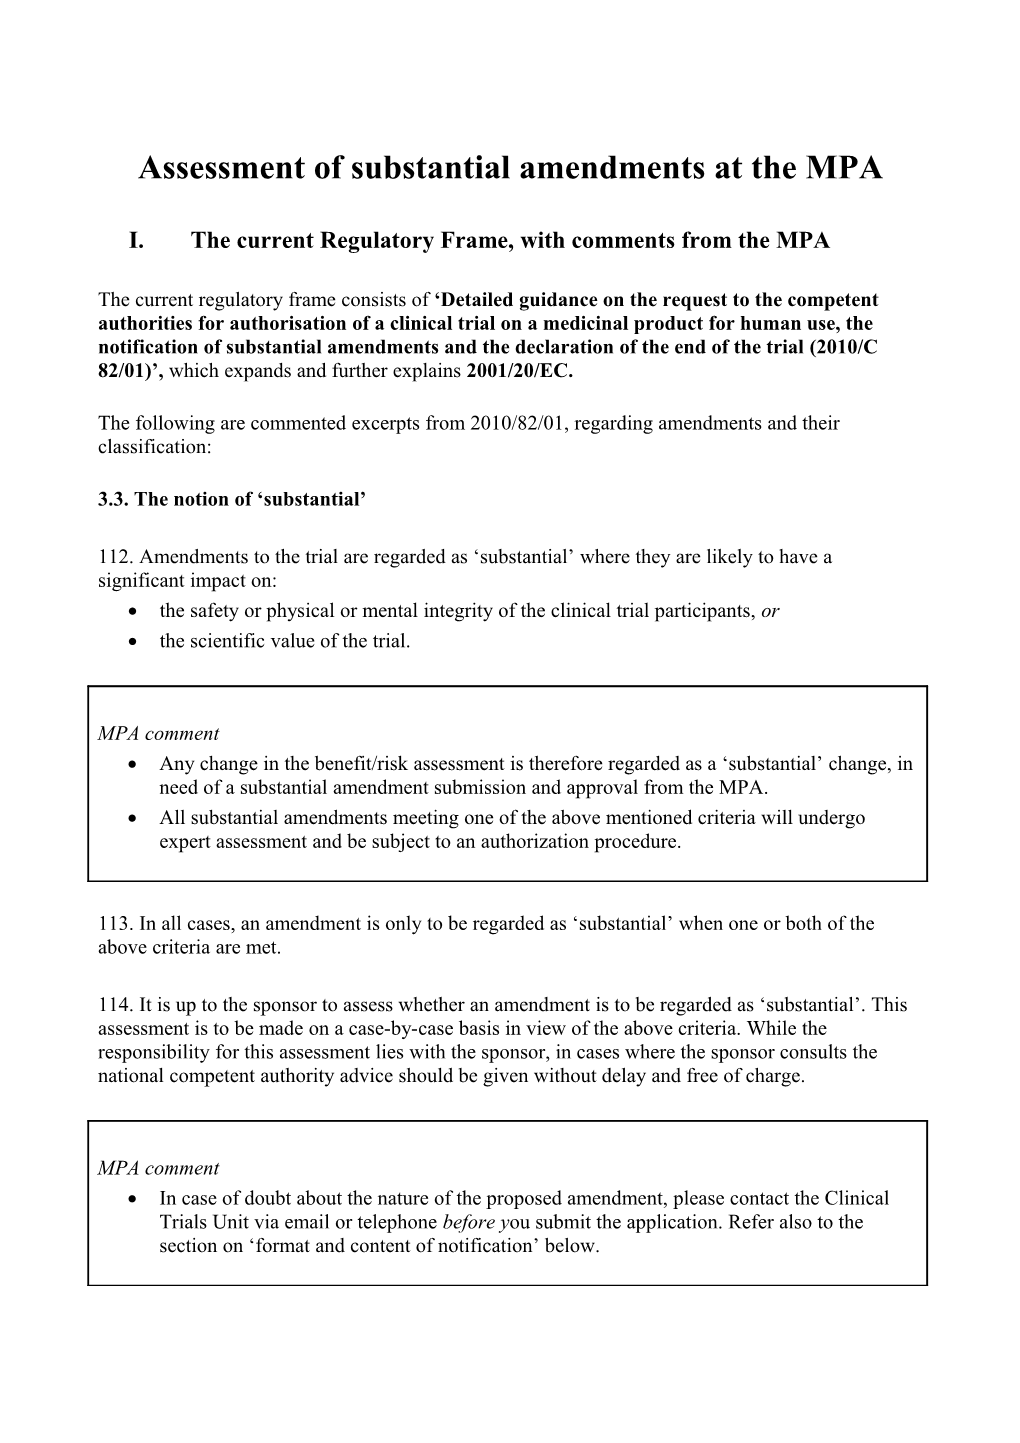 Assessment of Substantial Amendments at the MPA